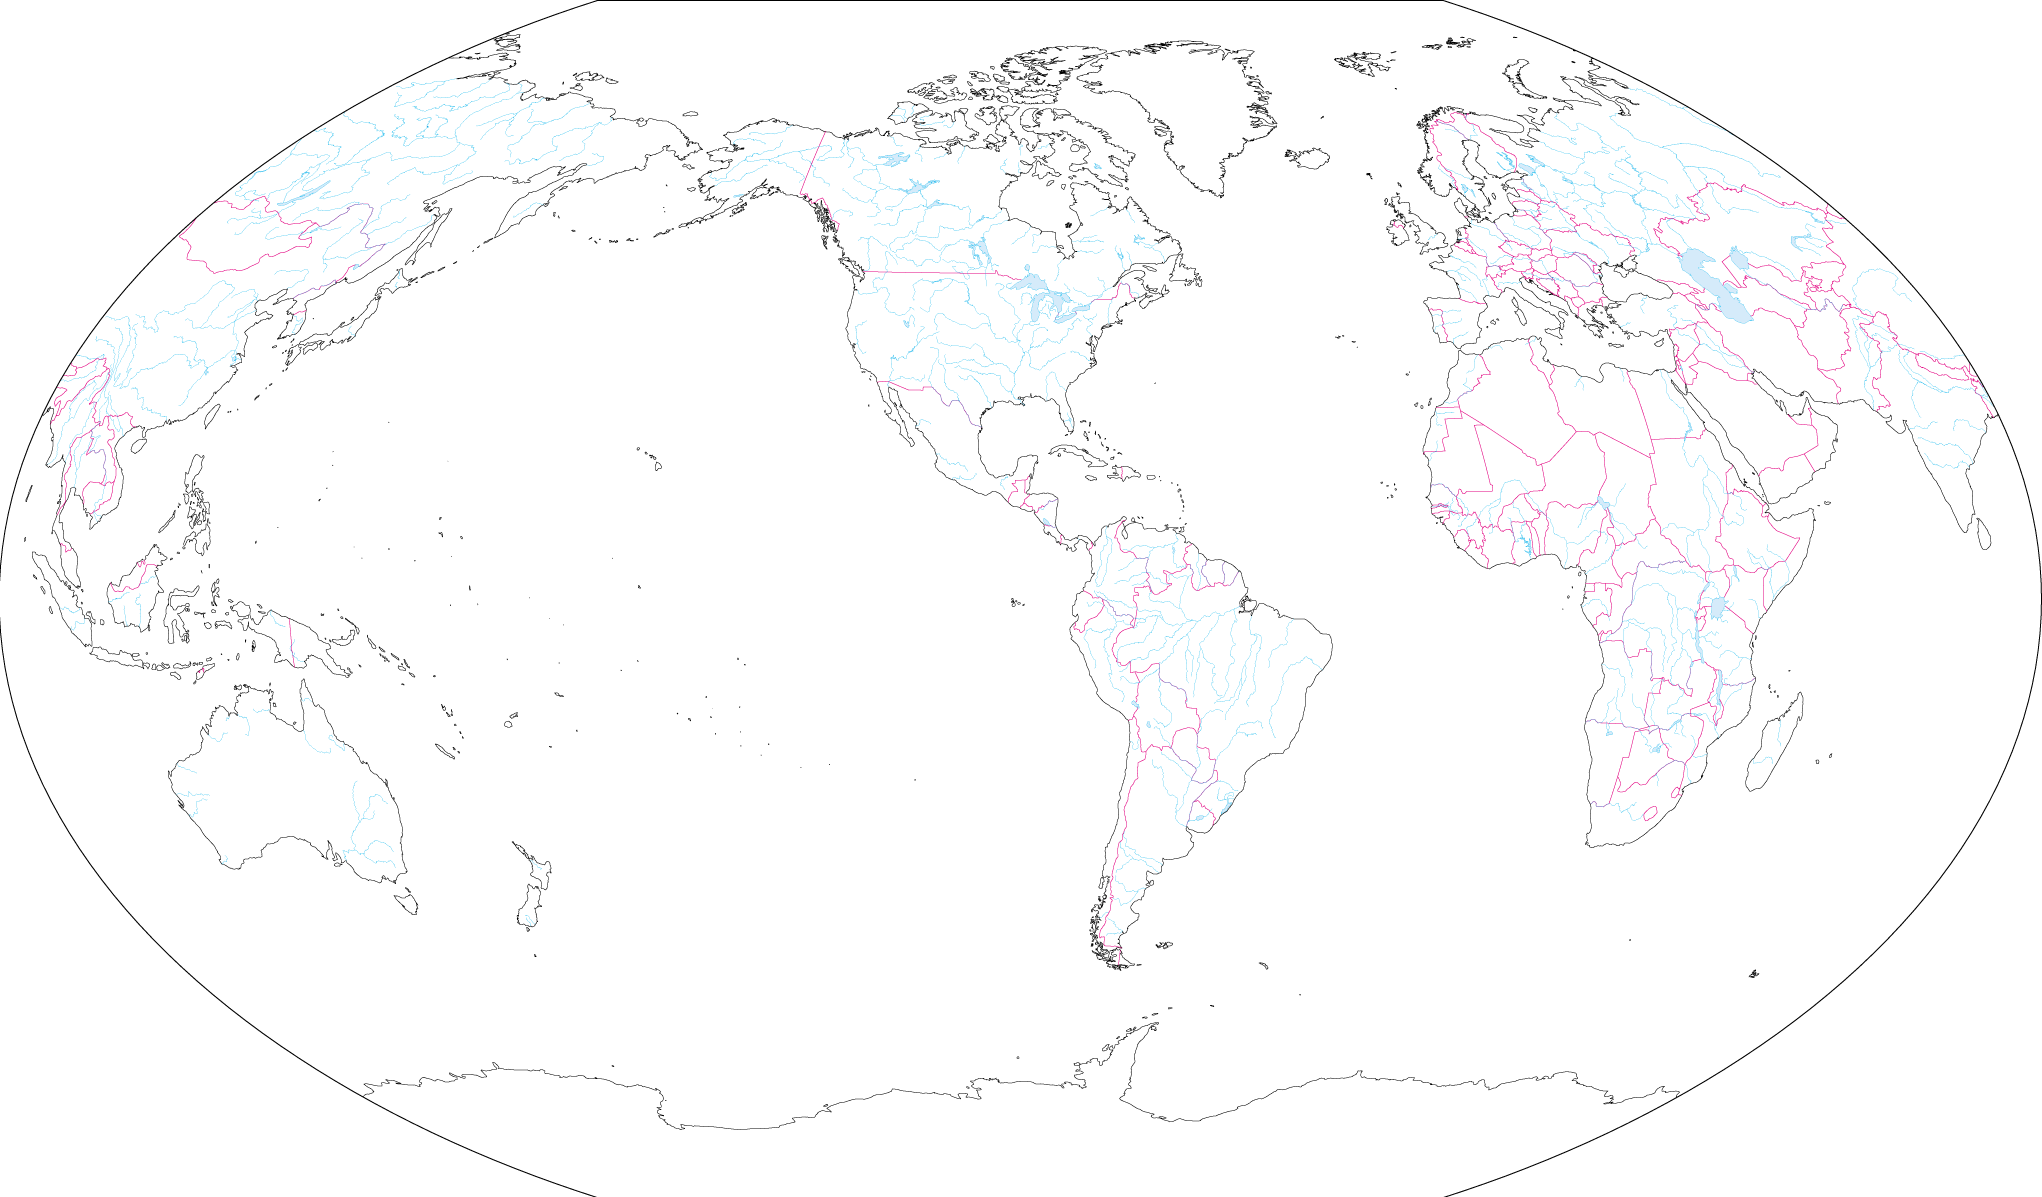 Winker projection - America center (With borders) image